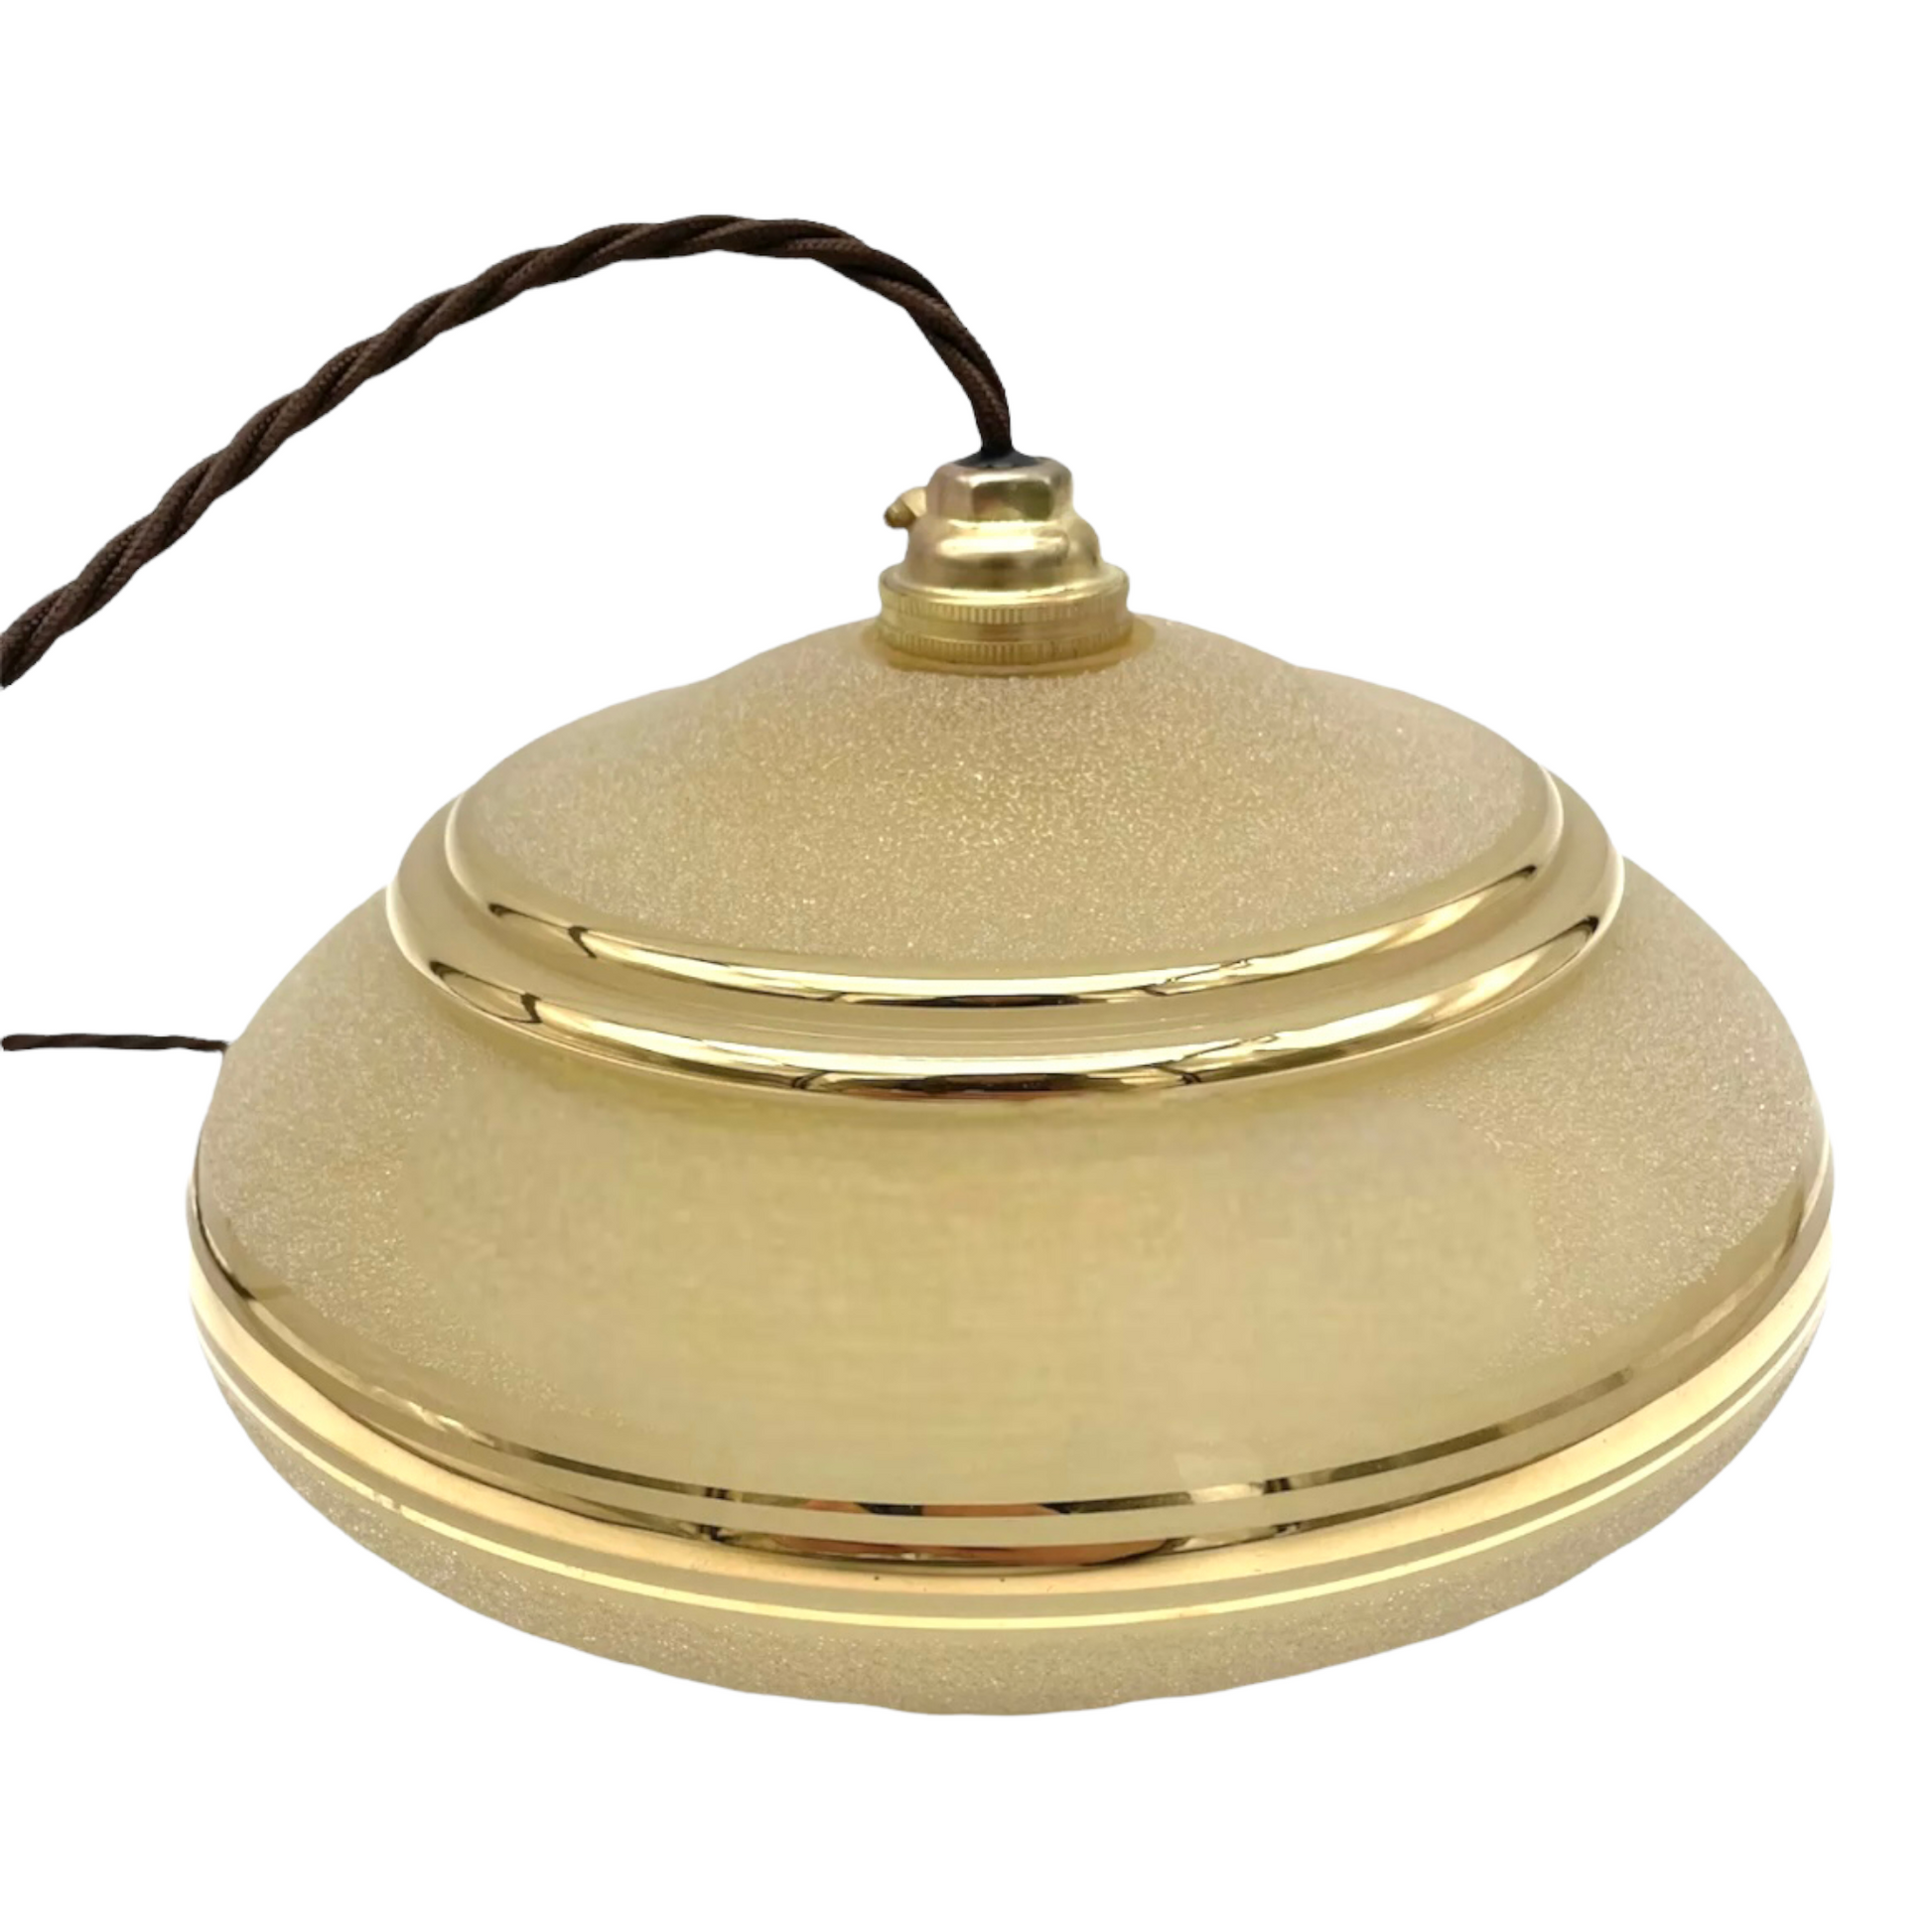 French amber coloured vintage glass ceiling light shade with a gold trim and new brown twisted wiring and a brass bulb holder